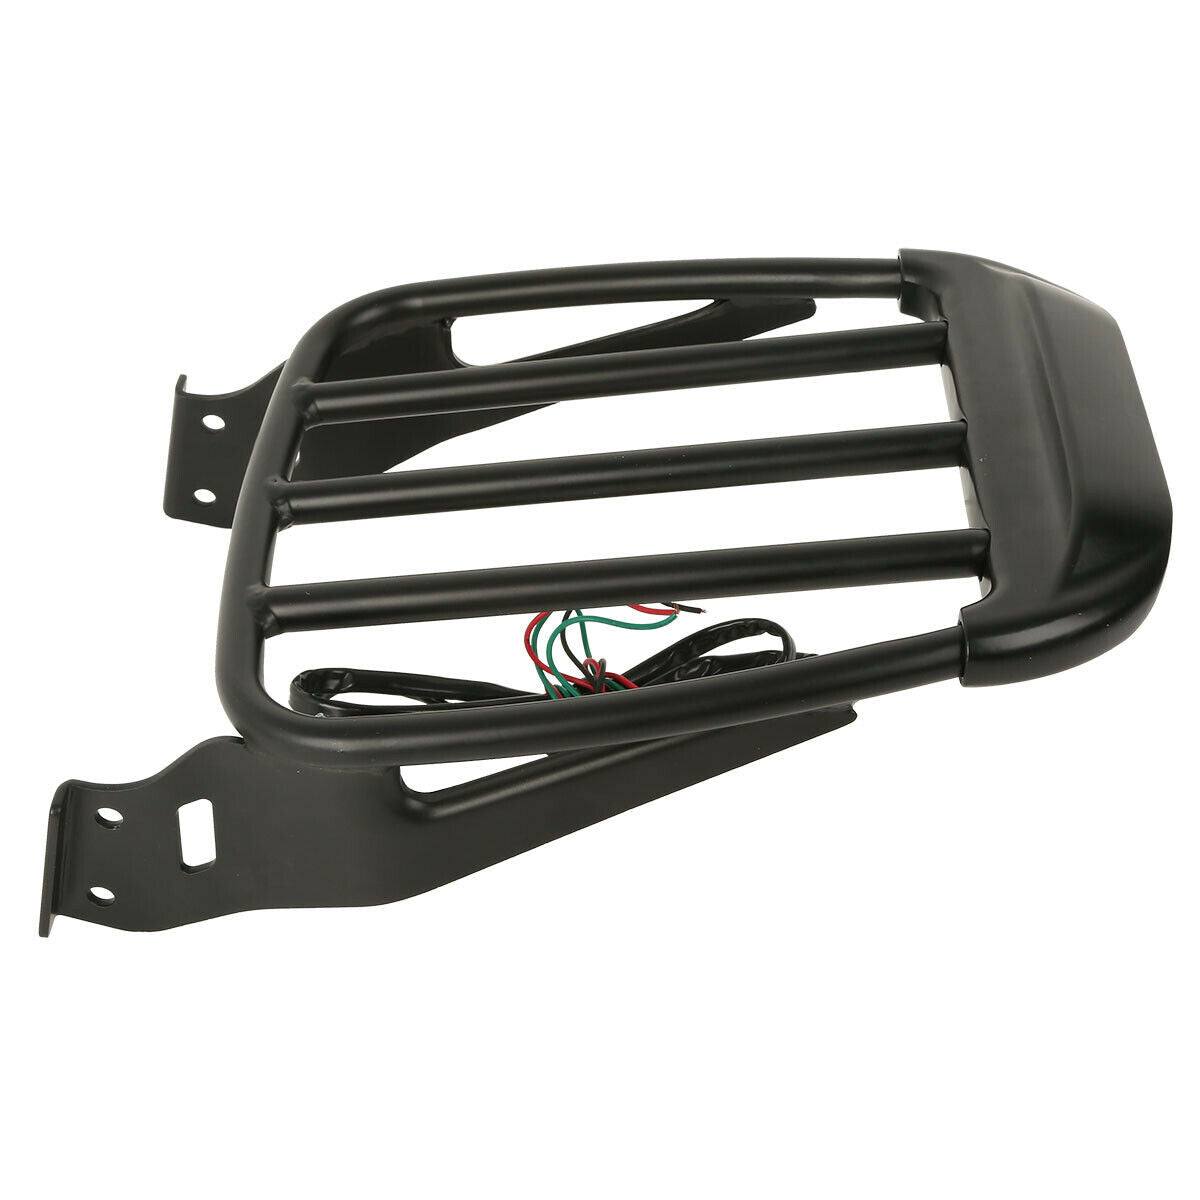 Two-Up Detachable Luggage Rack &LED Light Fit For Harley Dyna Low Rider Softail - Moto Life Products